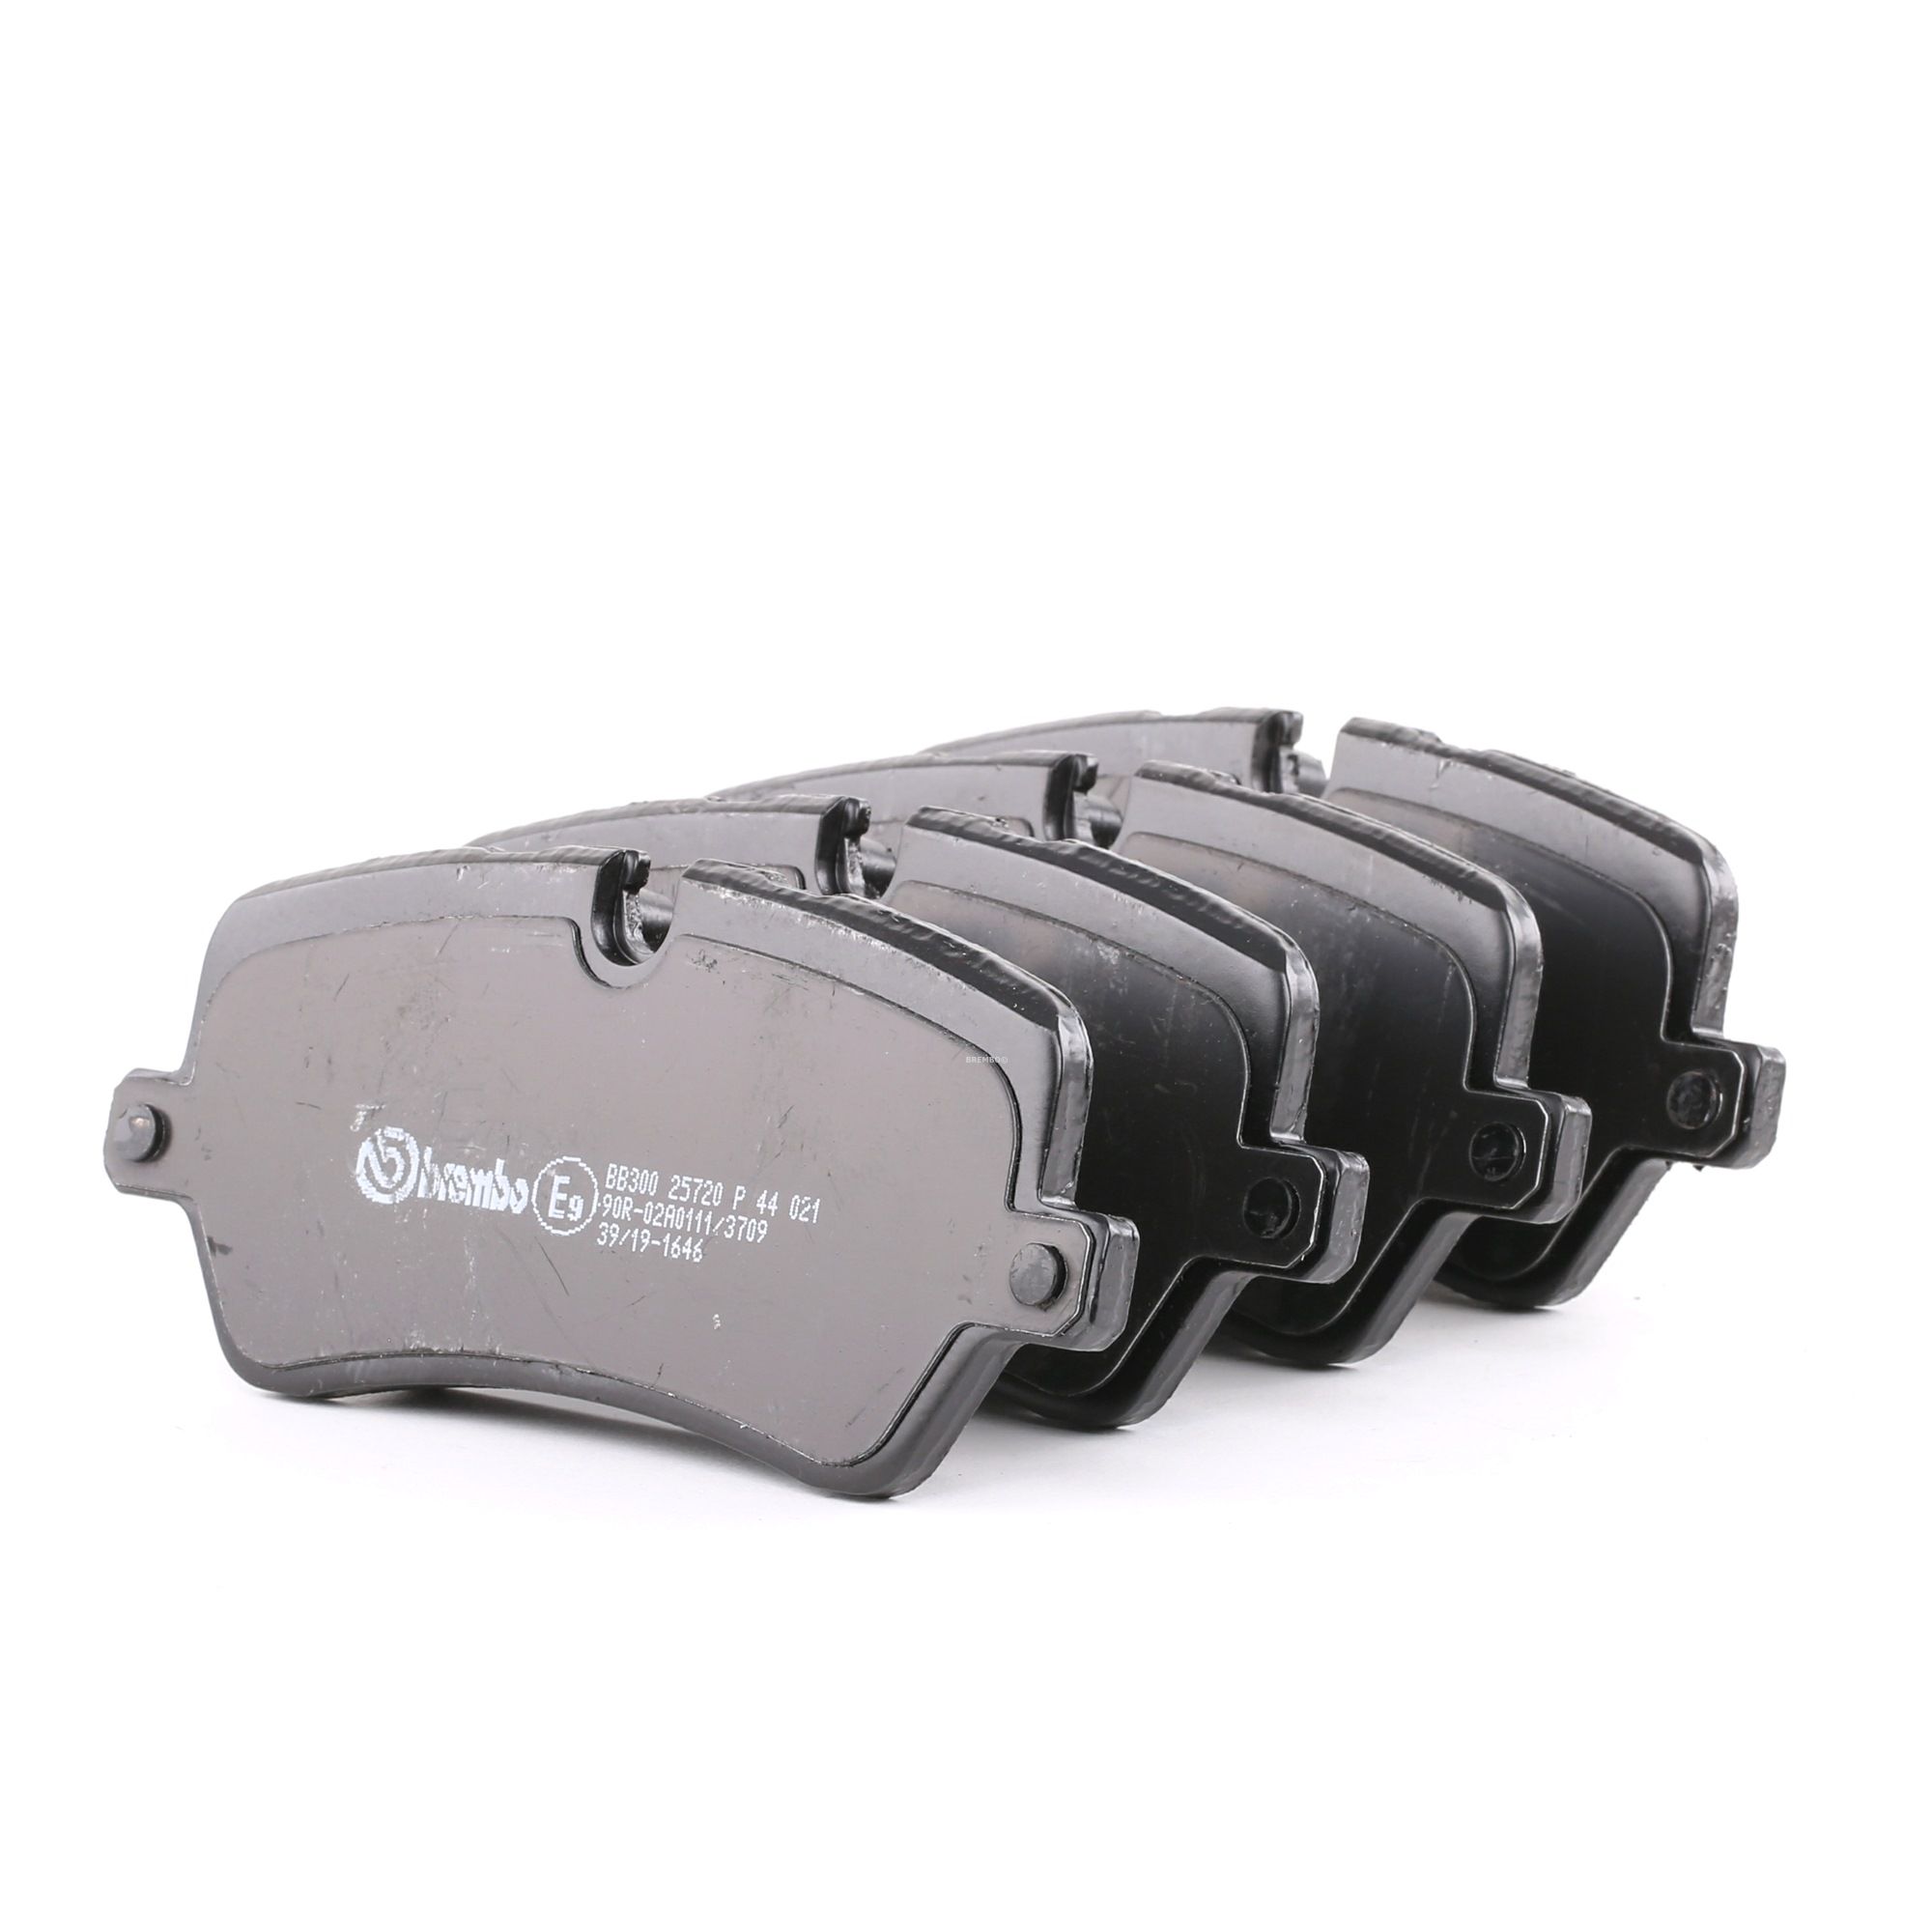 BREMBO P 44 021 Brake pad set prepared for wear indicator, with accessories